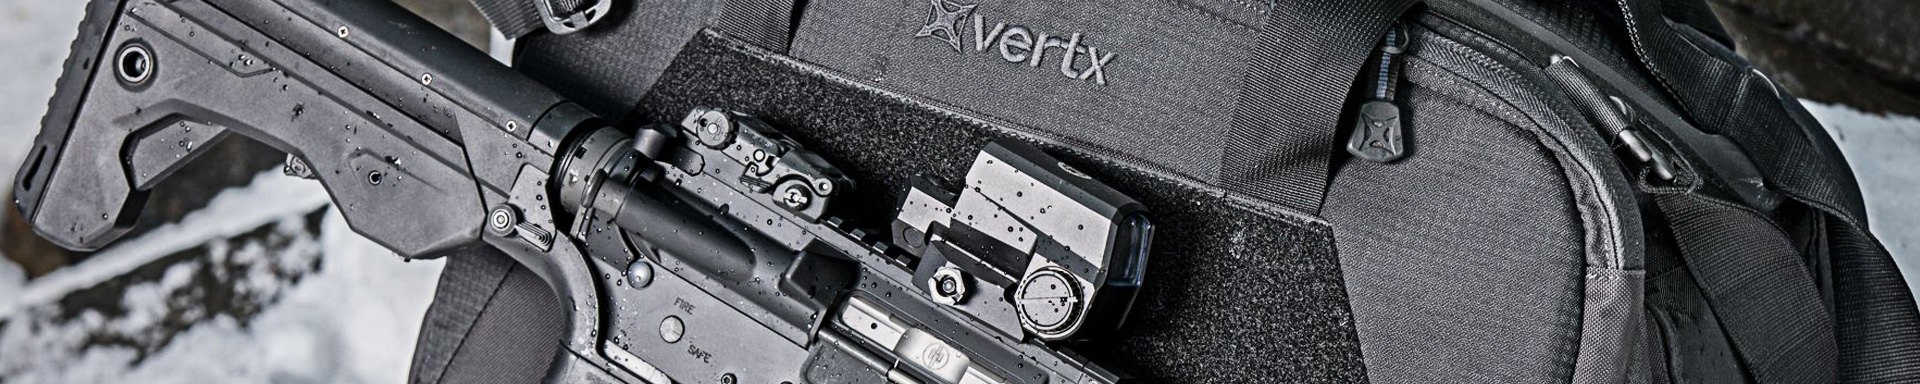 Vertx Tactical & Military Clothing